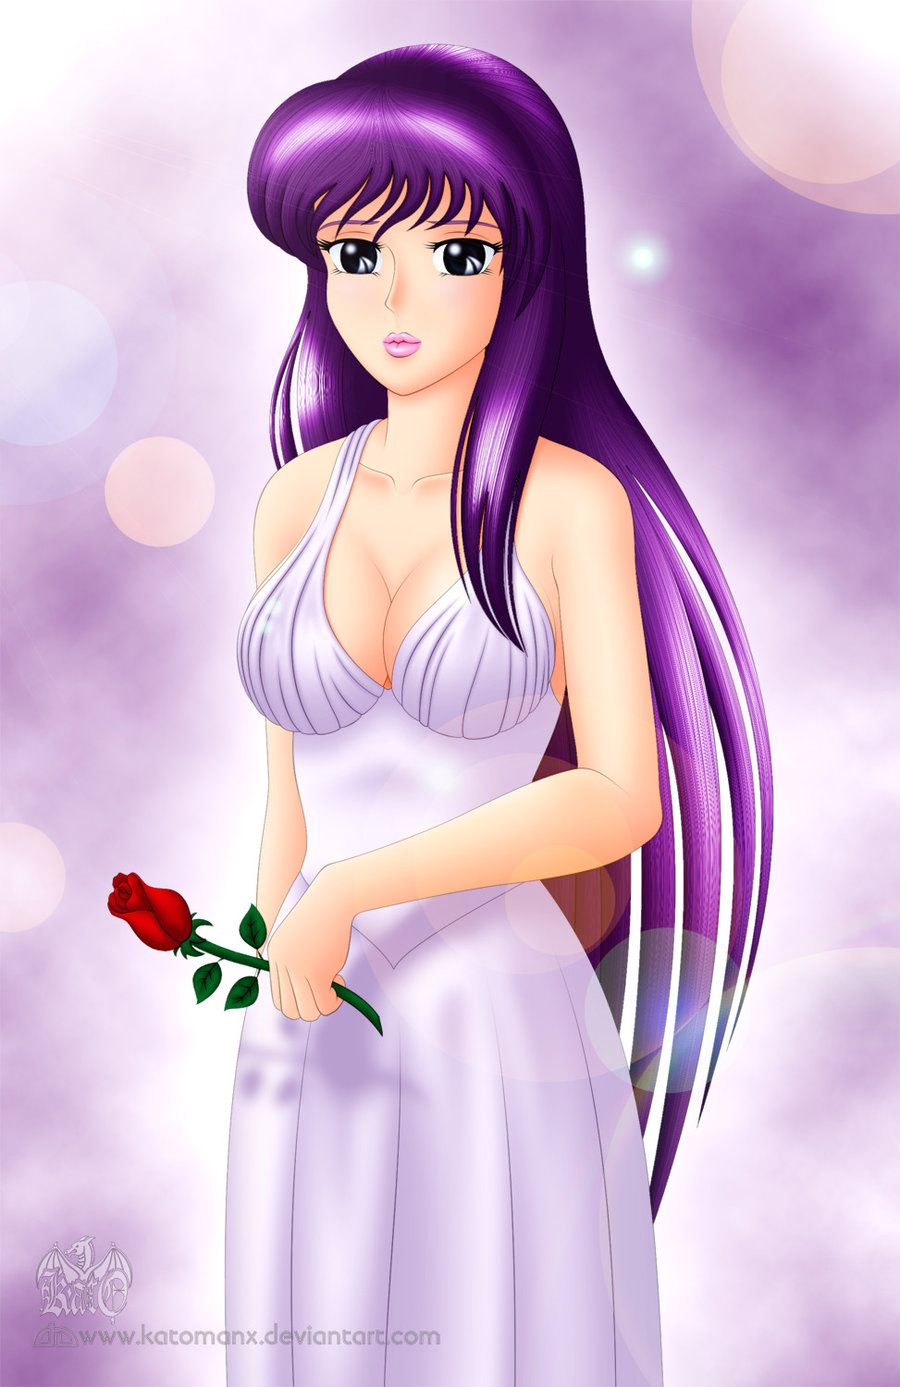 1girl arm arm_at_side arms art athena_(saint_seiya) babe bare_arms bare_shoulders big_breasts black_eyes breasts cleavage collarbone deviantart dress flower formal holding holding_flower katomanx lens_flare lips lipstick looking_at_viewer makeup neck pink_lipstick purple_hair red_rose rose saint_seiya saori_kido shiny shiny_hair standing very_long_hair white_dress